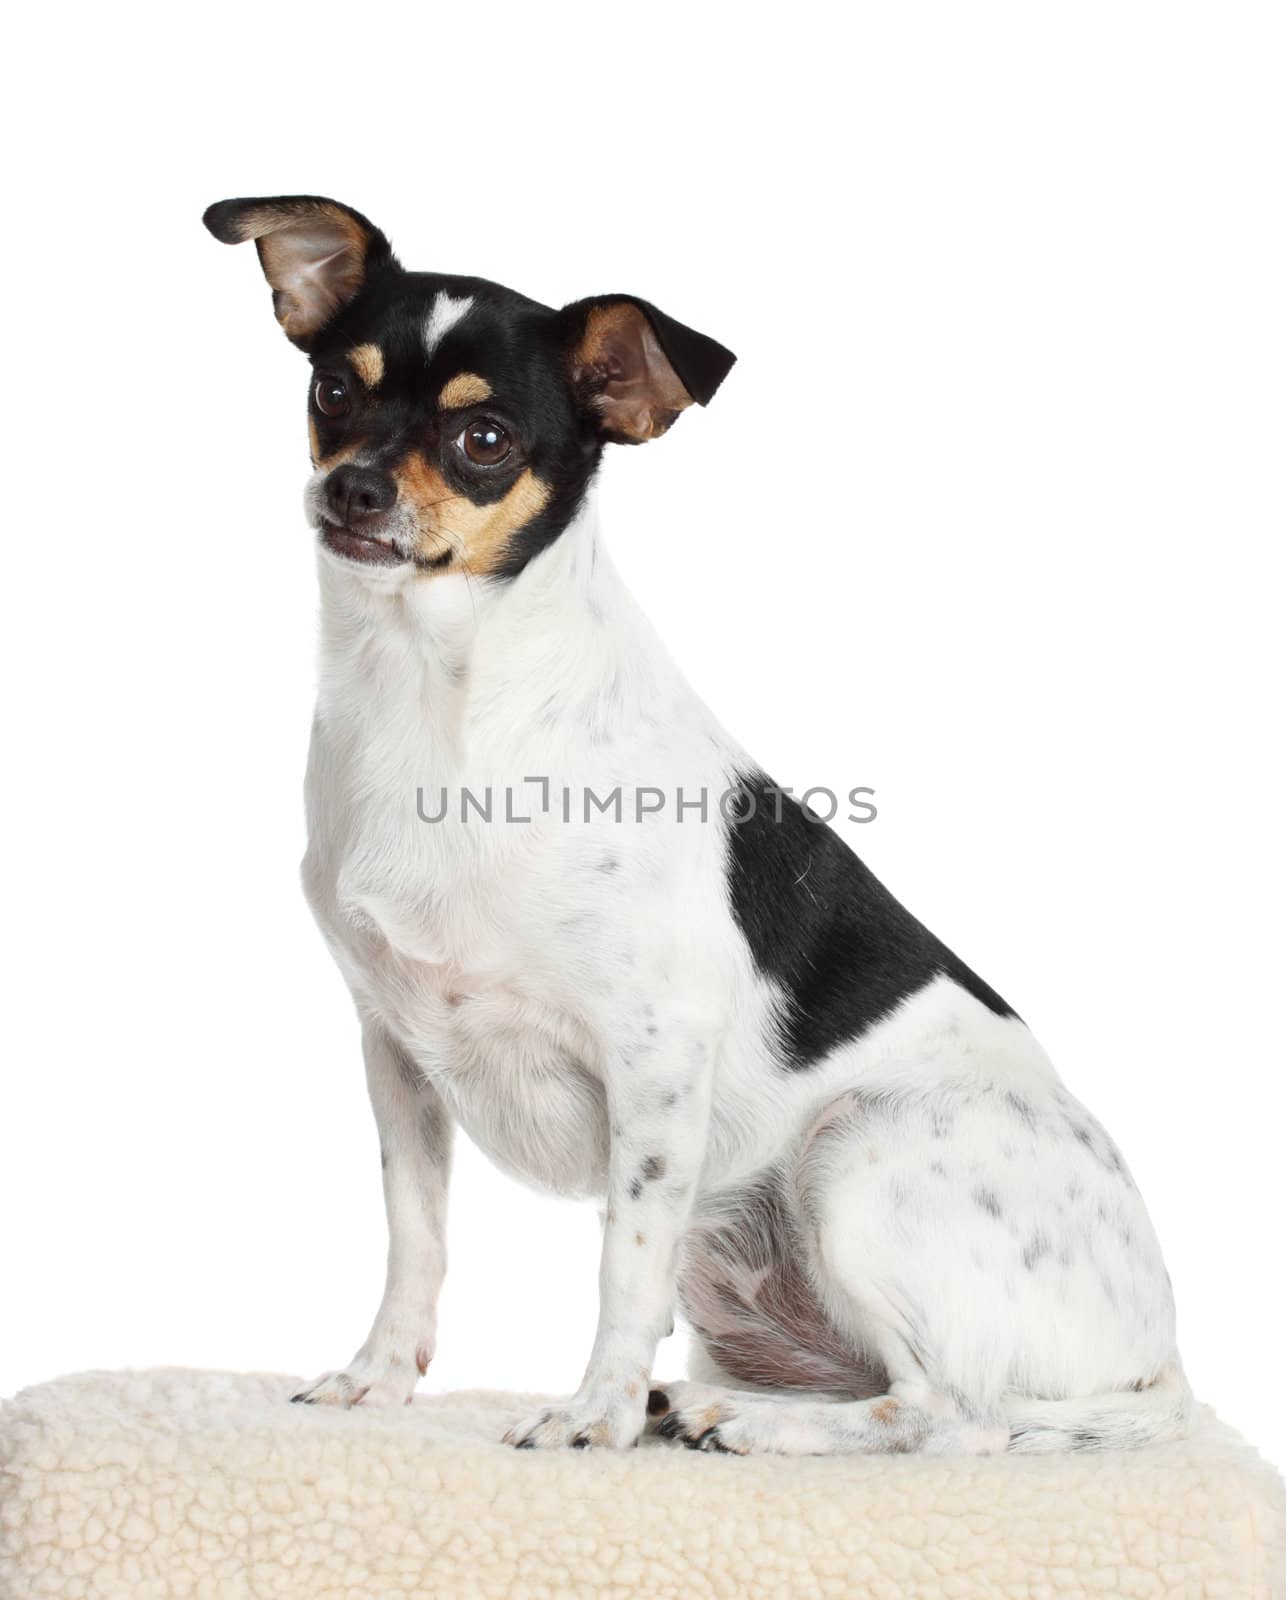 cute chihuahua dog isolated on white background